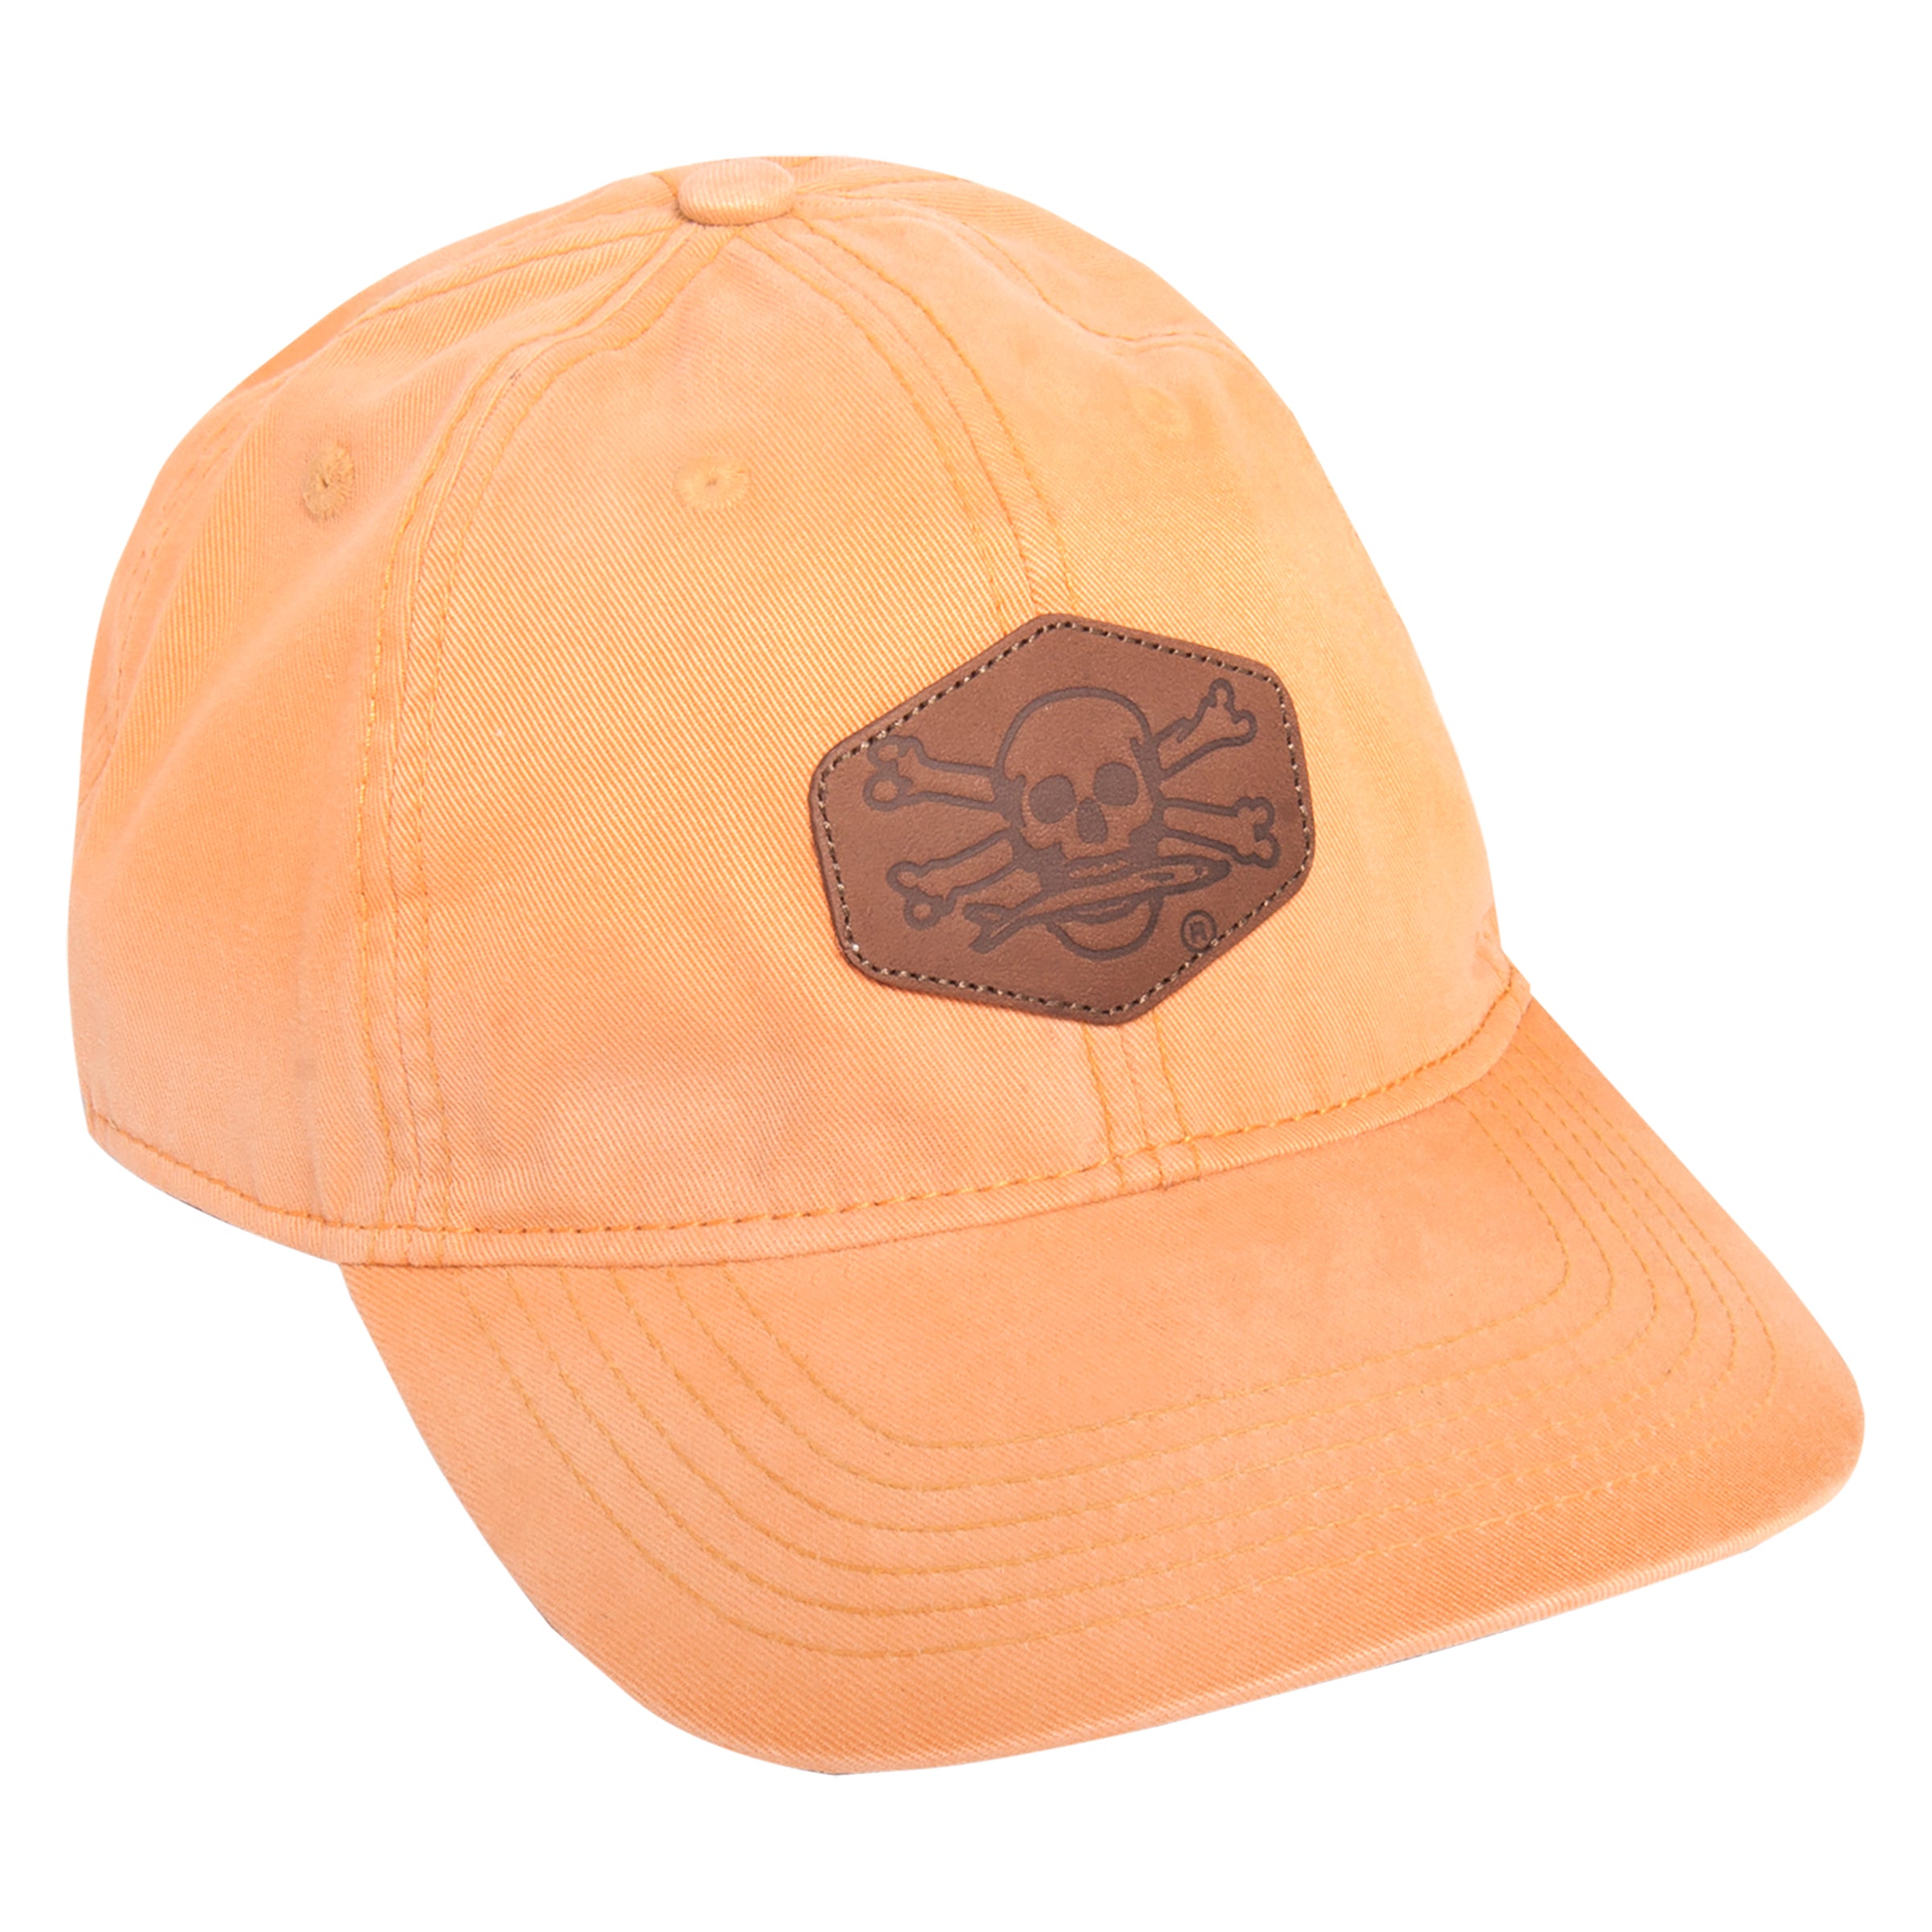 Cotton Twill Cap with Leather Patch